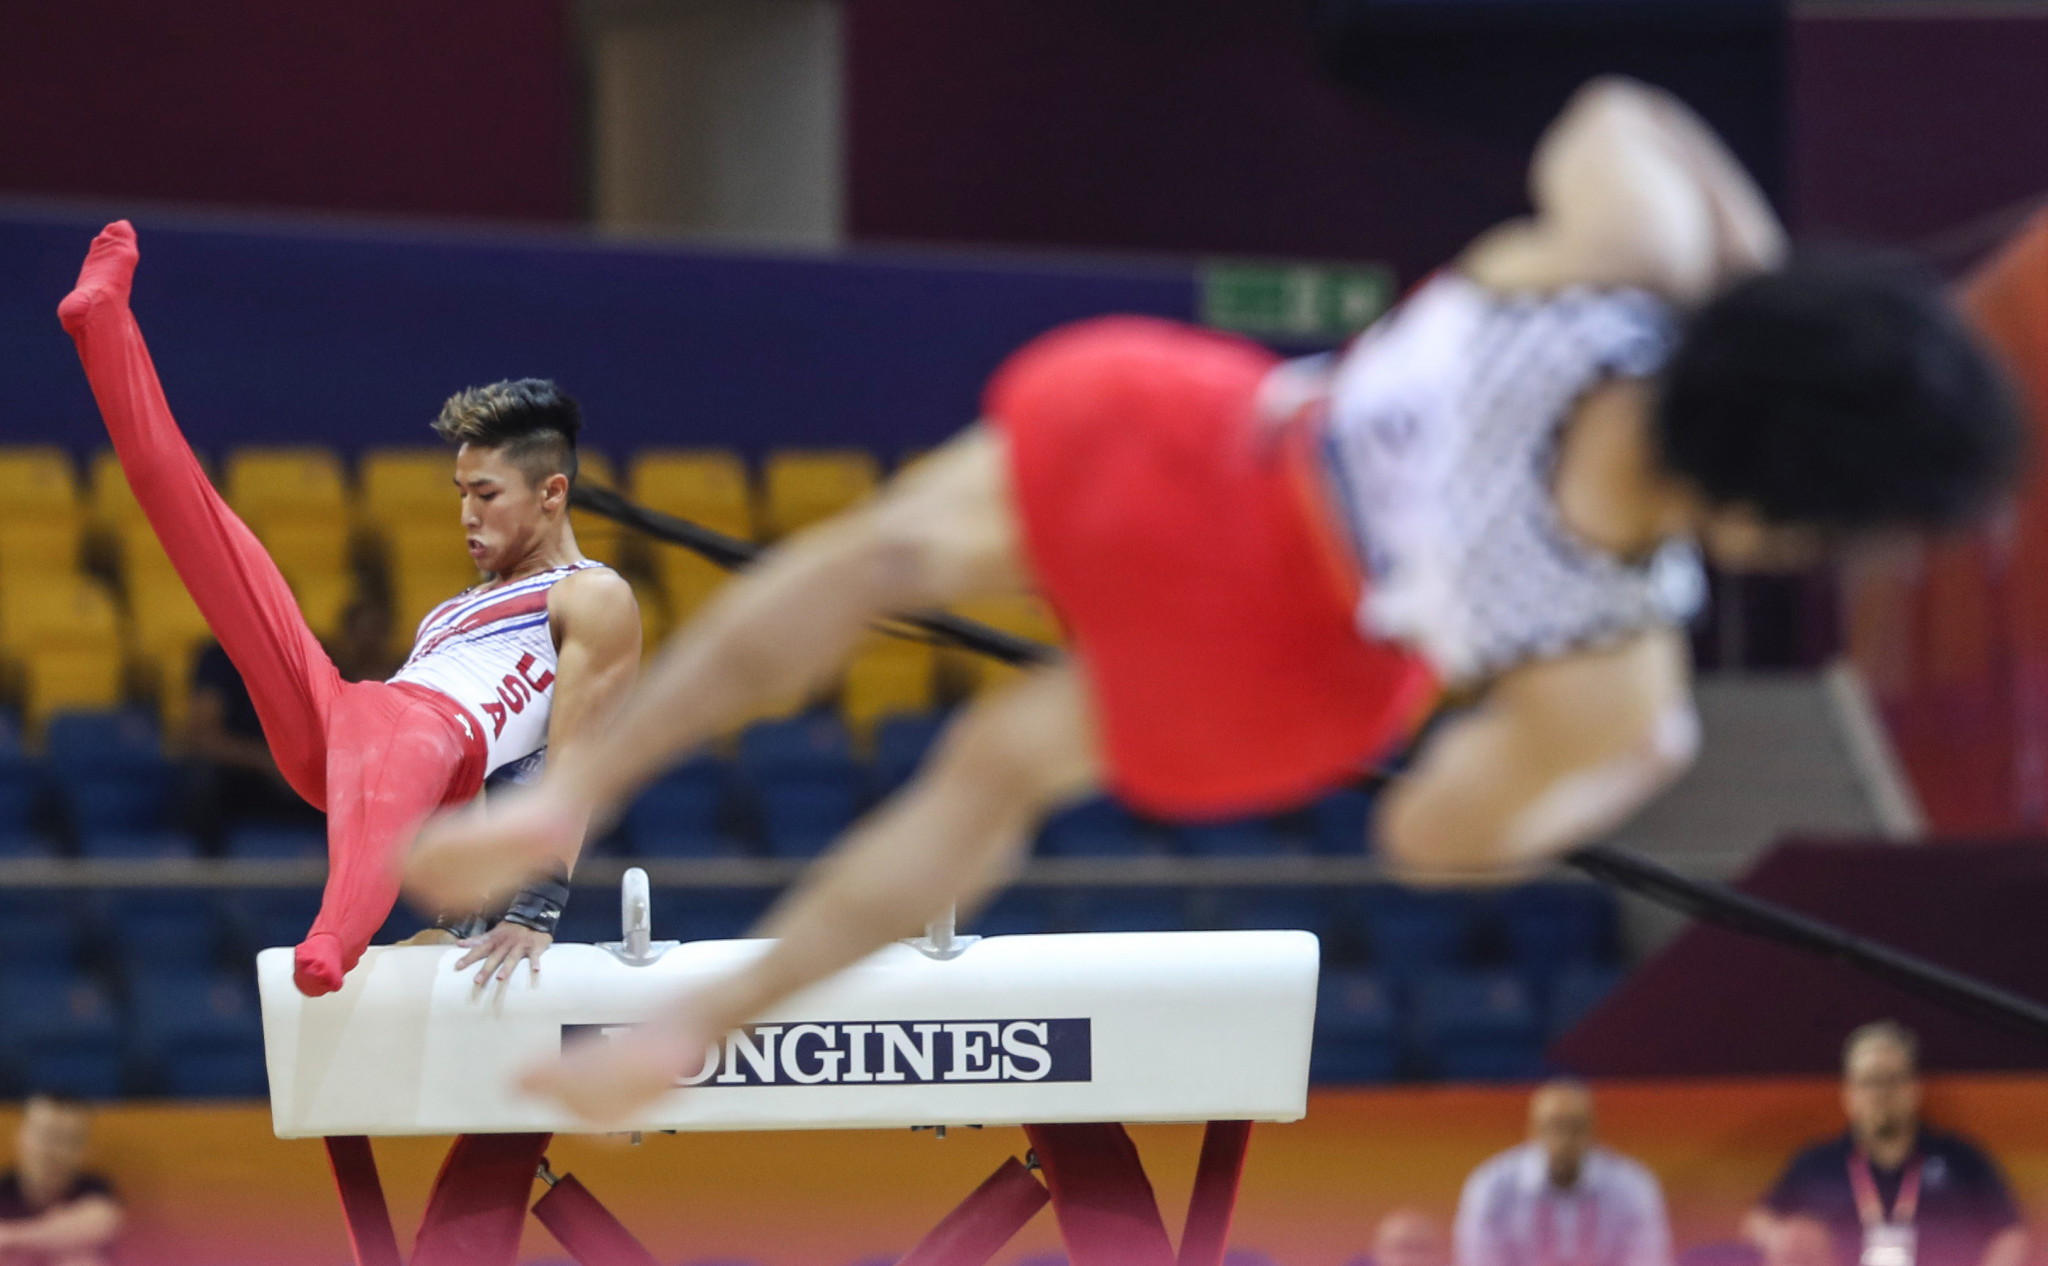 FIG Council approve changes to World Championship formats